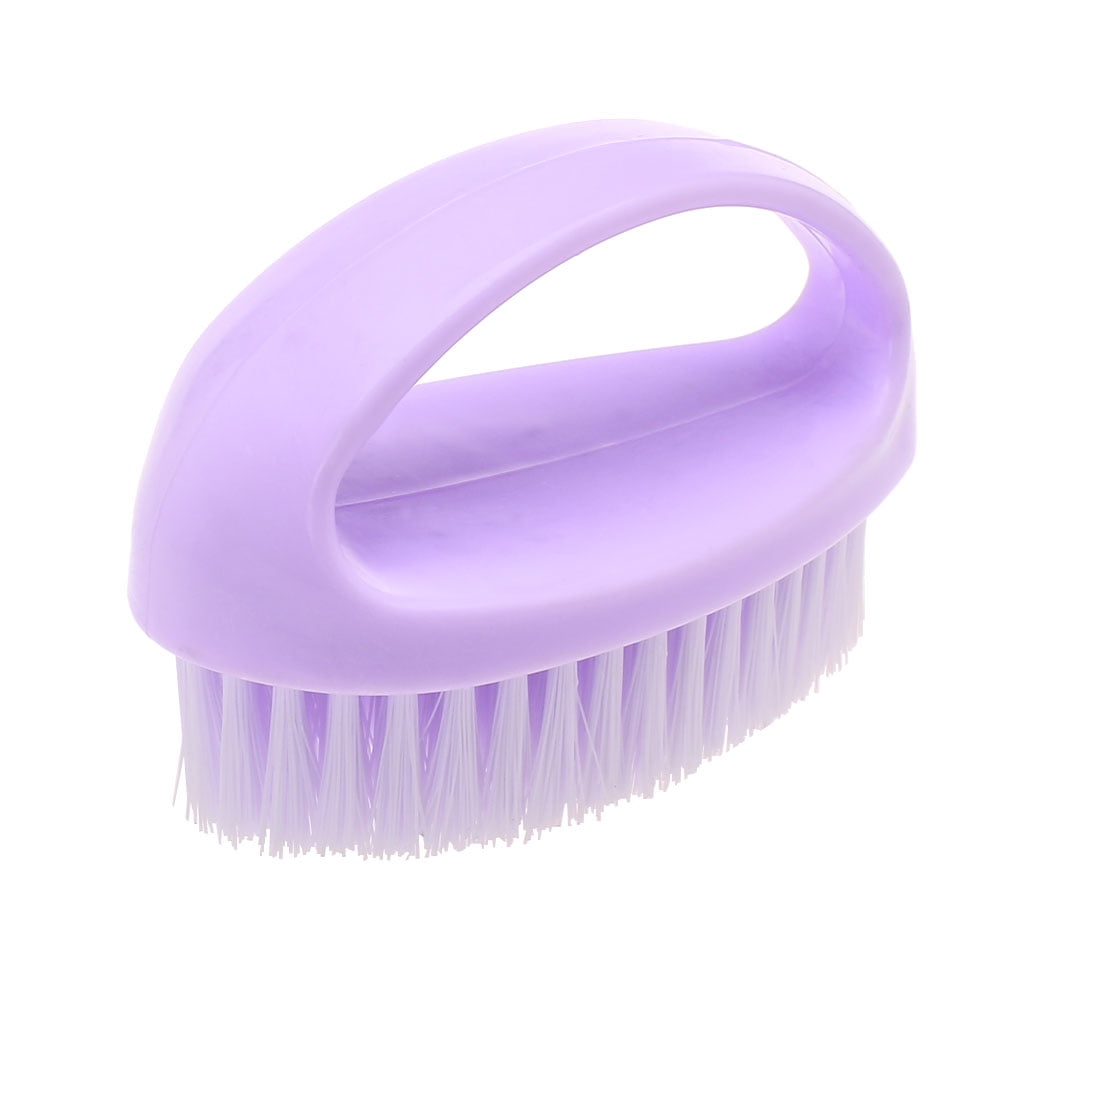 Scrubbing Brush Plastic Durable Shoe Cleaner Brush for Shoes Clothes Tile 8C 